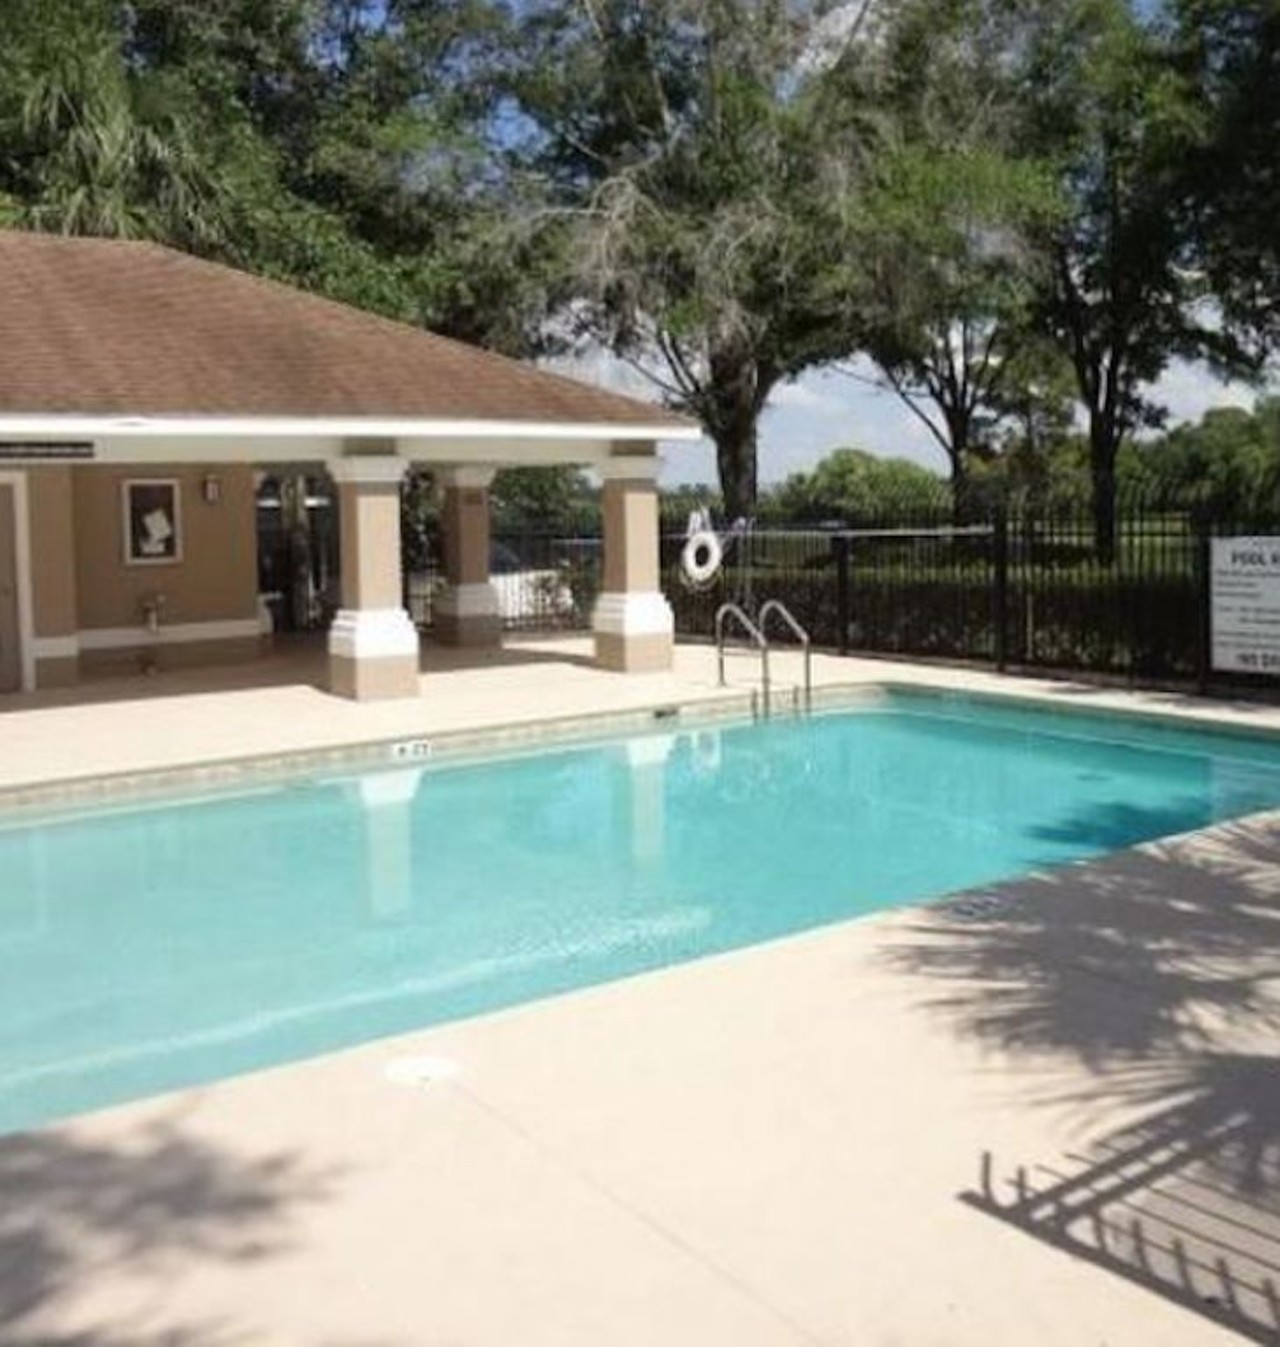 7123 Yacht Basin Ave, Orlando
$1,250/mo
2 bed, 2 bath, 1,050 sqft
Located in Metrowest, this apartment is near everything, including major highways, theme parks and more. It also has new carpet and wood floors.